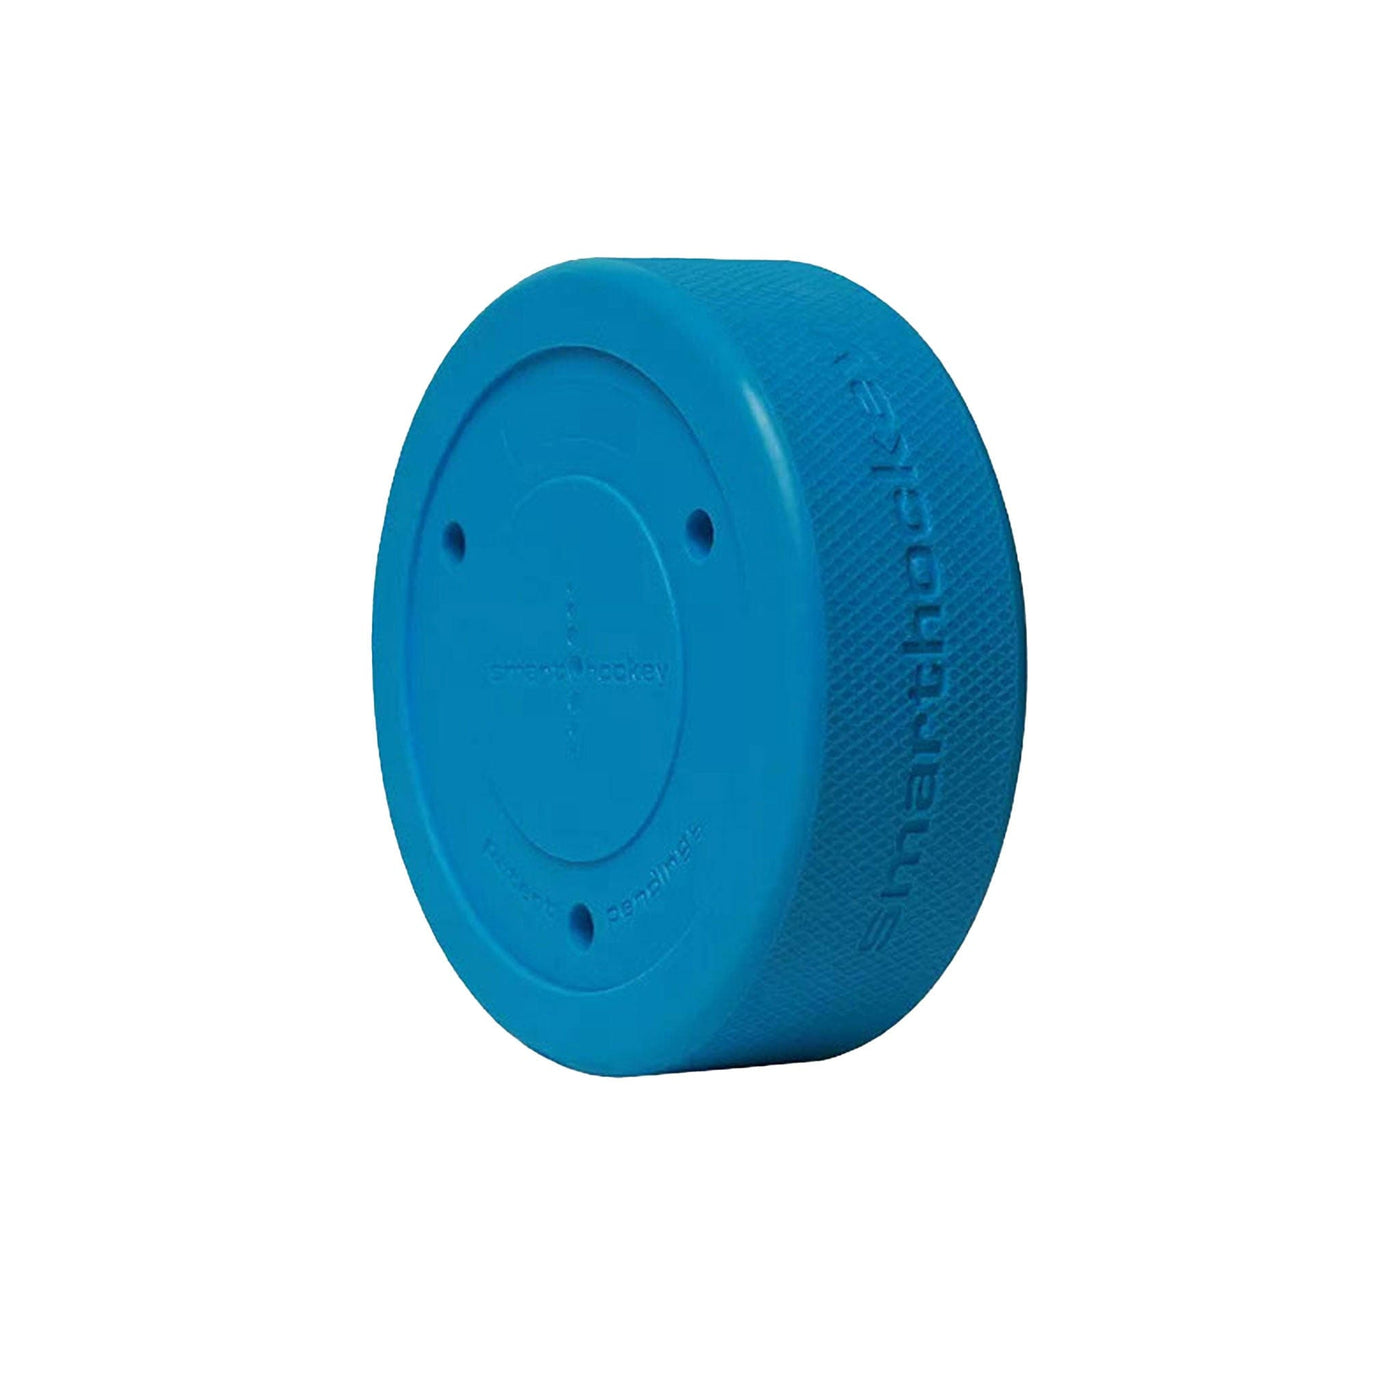 Blue weighted training puck weighing 10 ounces made for improving skills. 